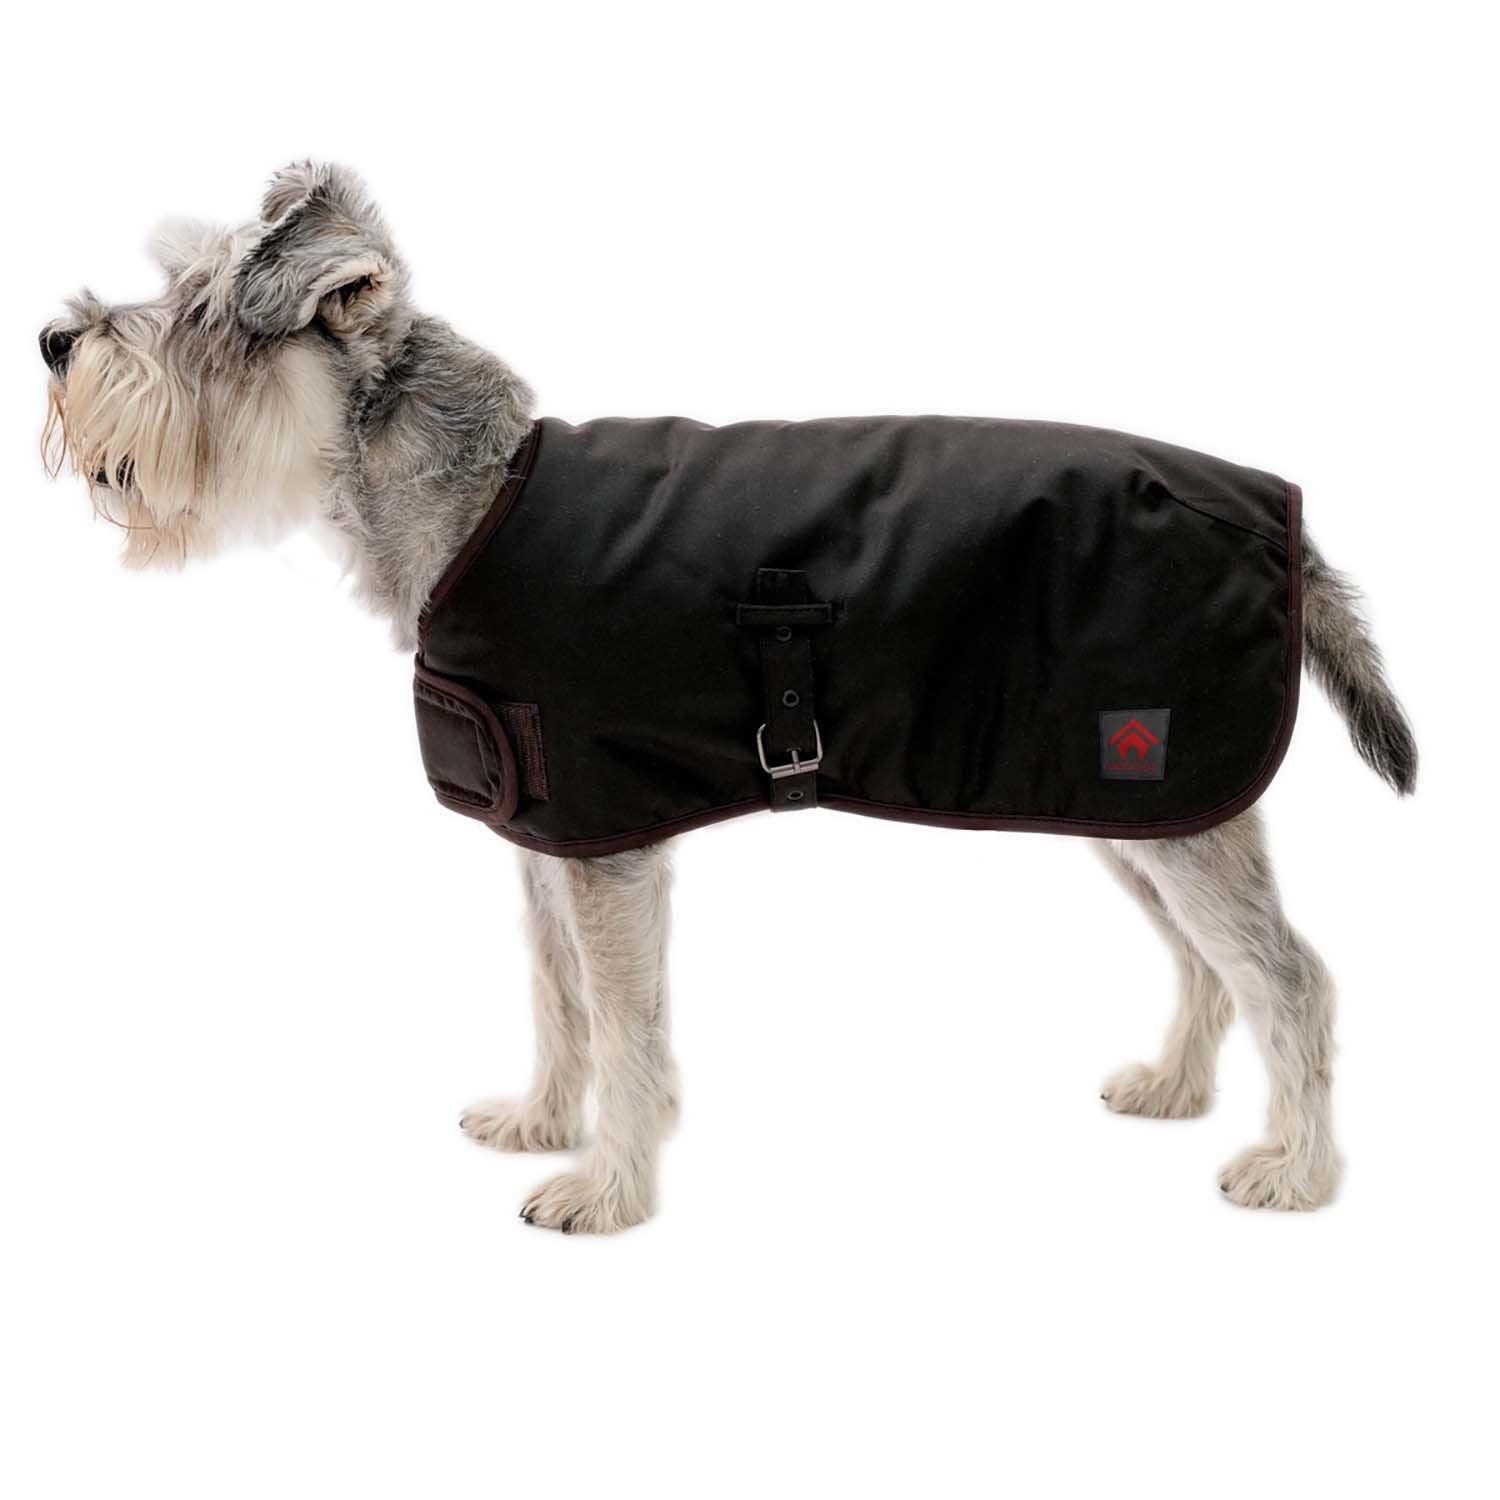 Firefoot Waxed Dog Coat - Just Horse Riders